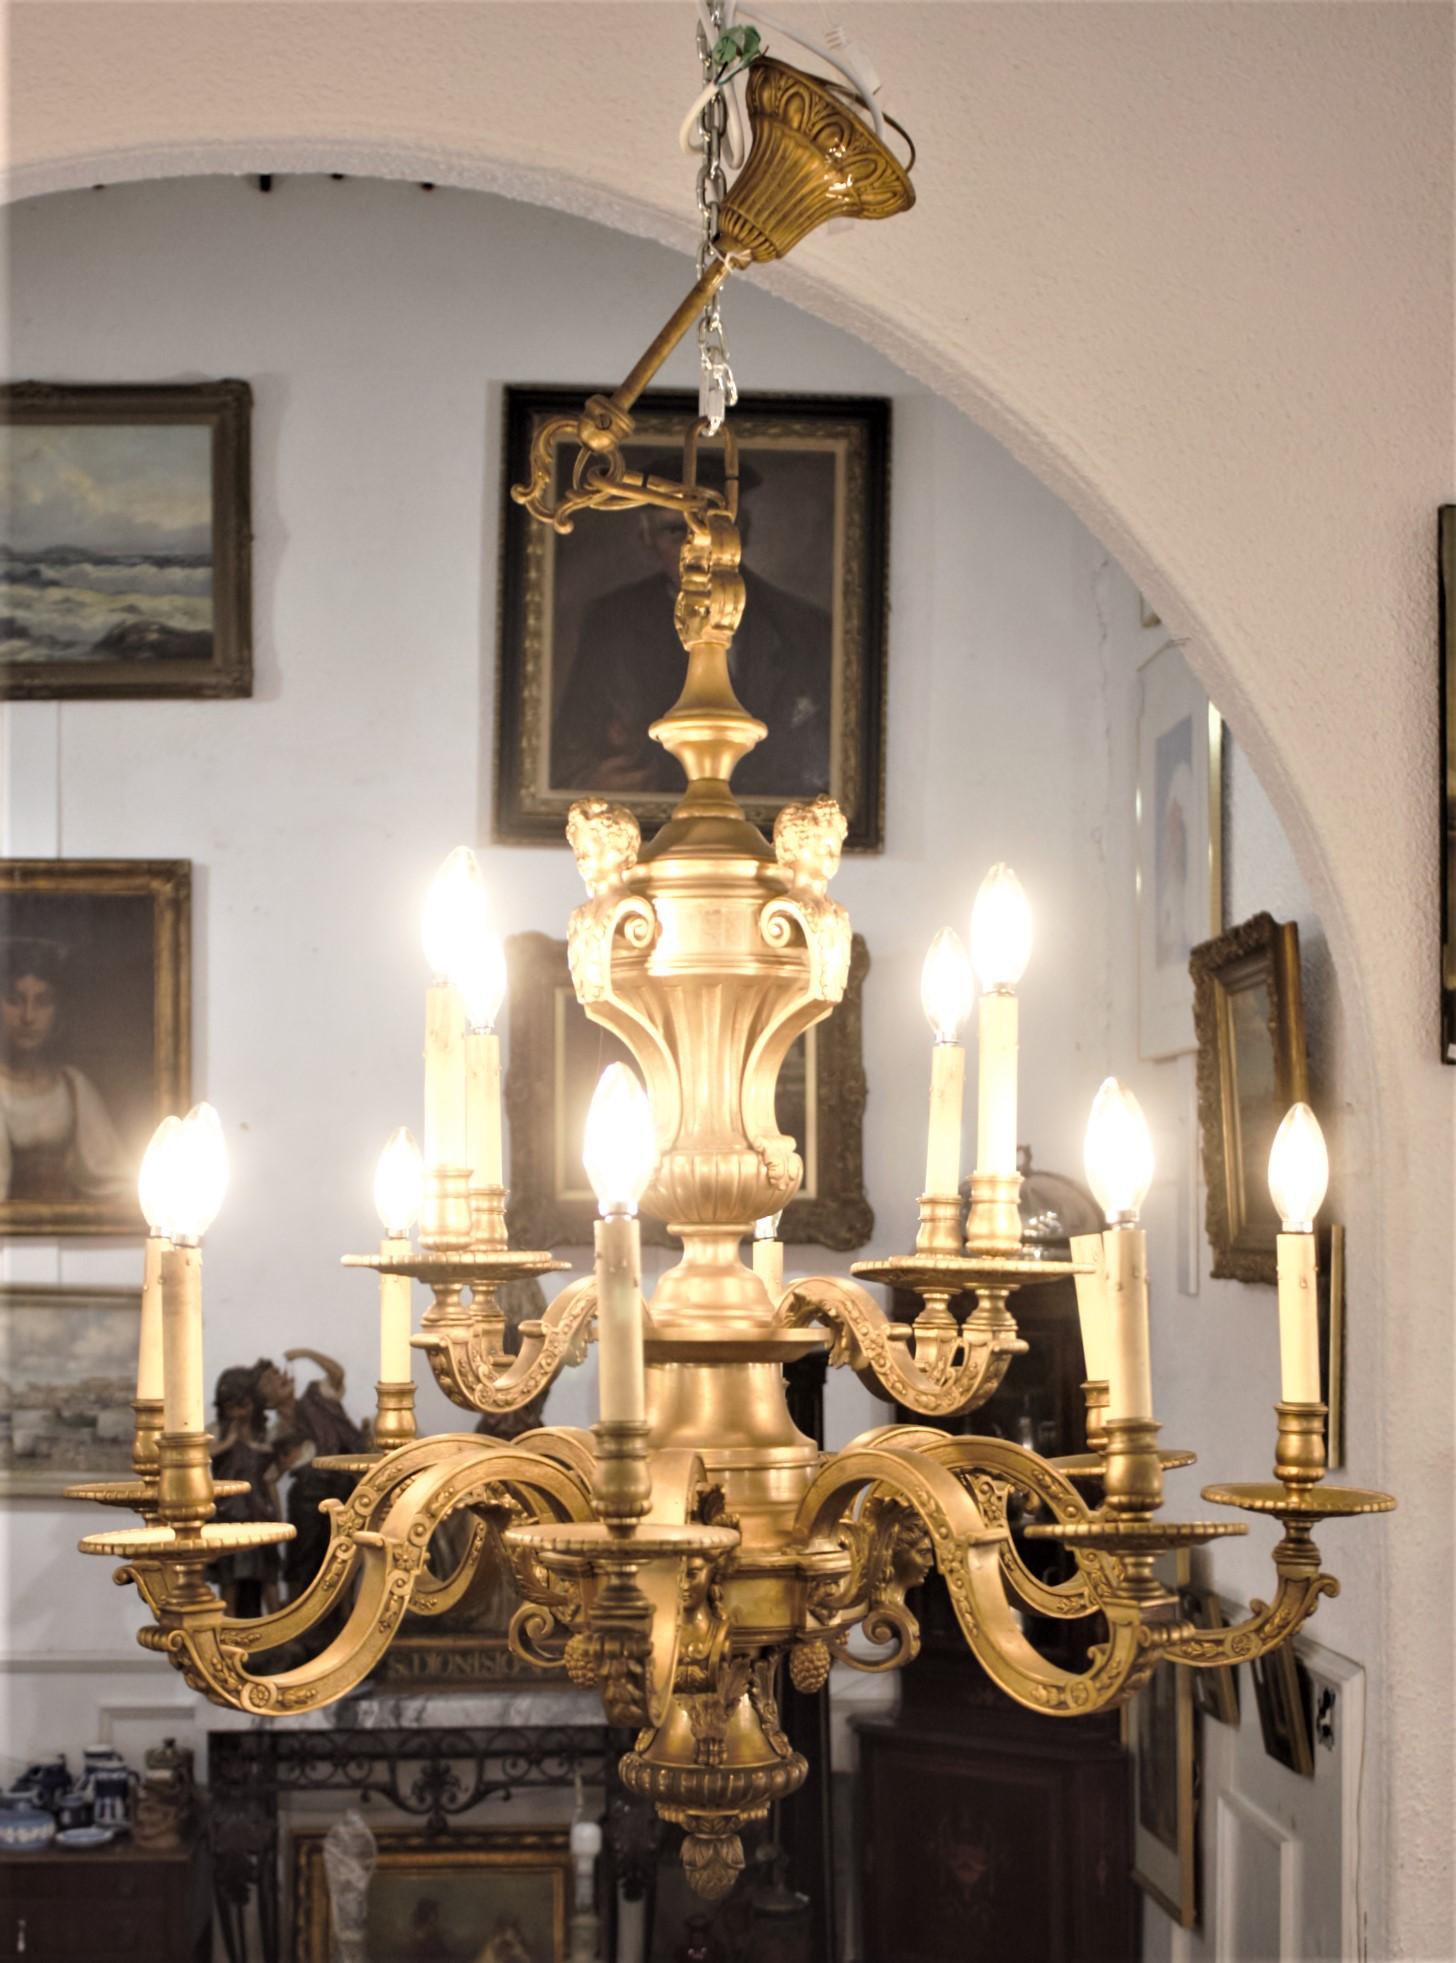 This very large and substantial cast and gilt bronze twelve-arm chandelier was made in France is circa 1900 in the Louis XIV style. The chandelier is ornately cast with a series of figural heads on the top, which are repeated around the central body